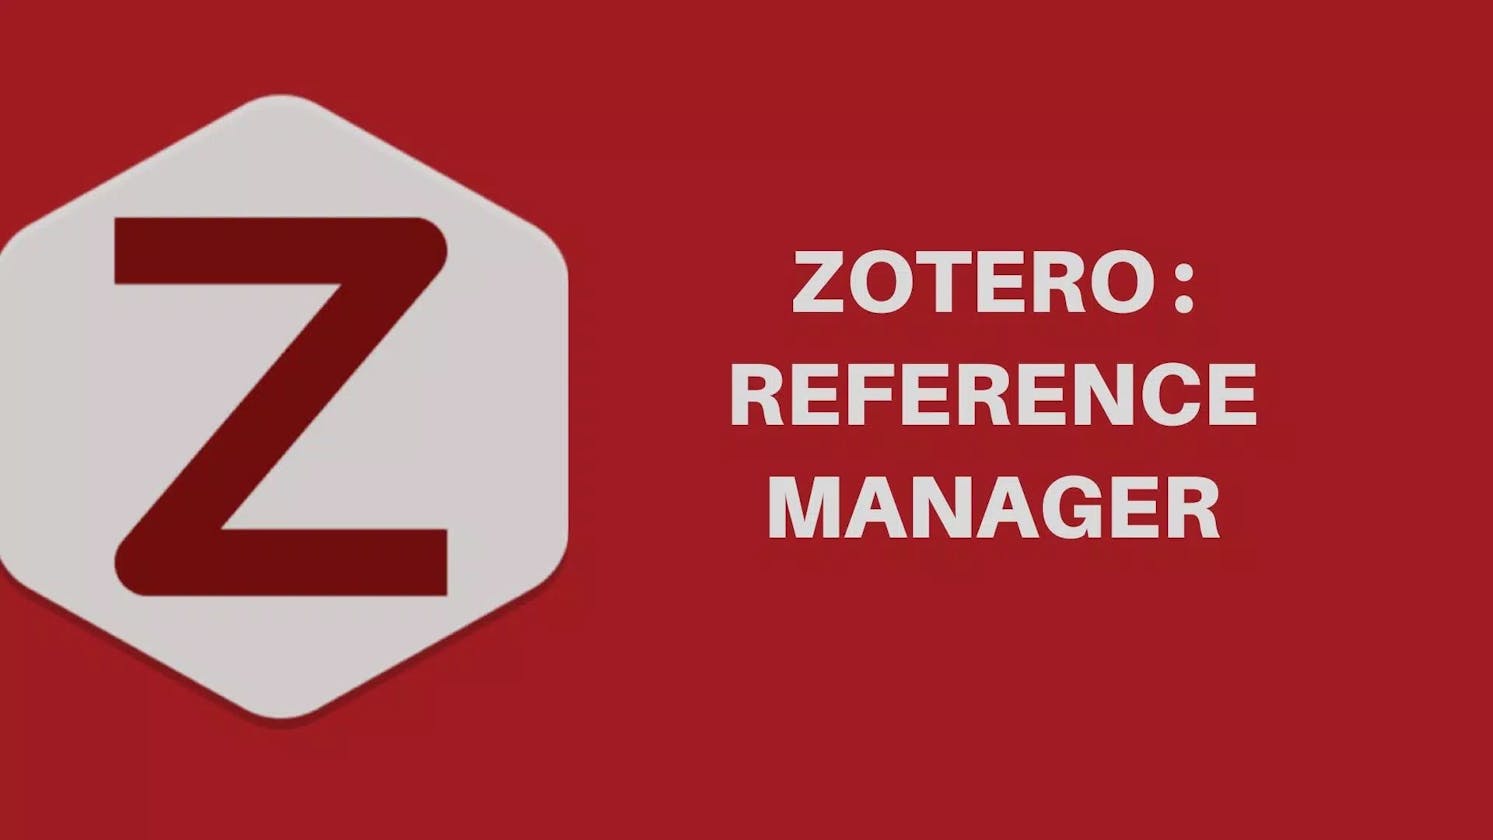 Getting Started using Zotero as a Reference Manager